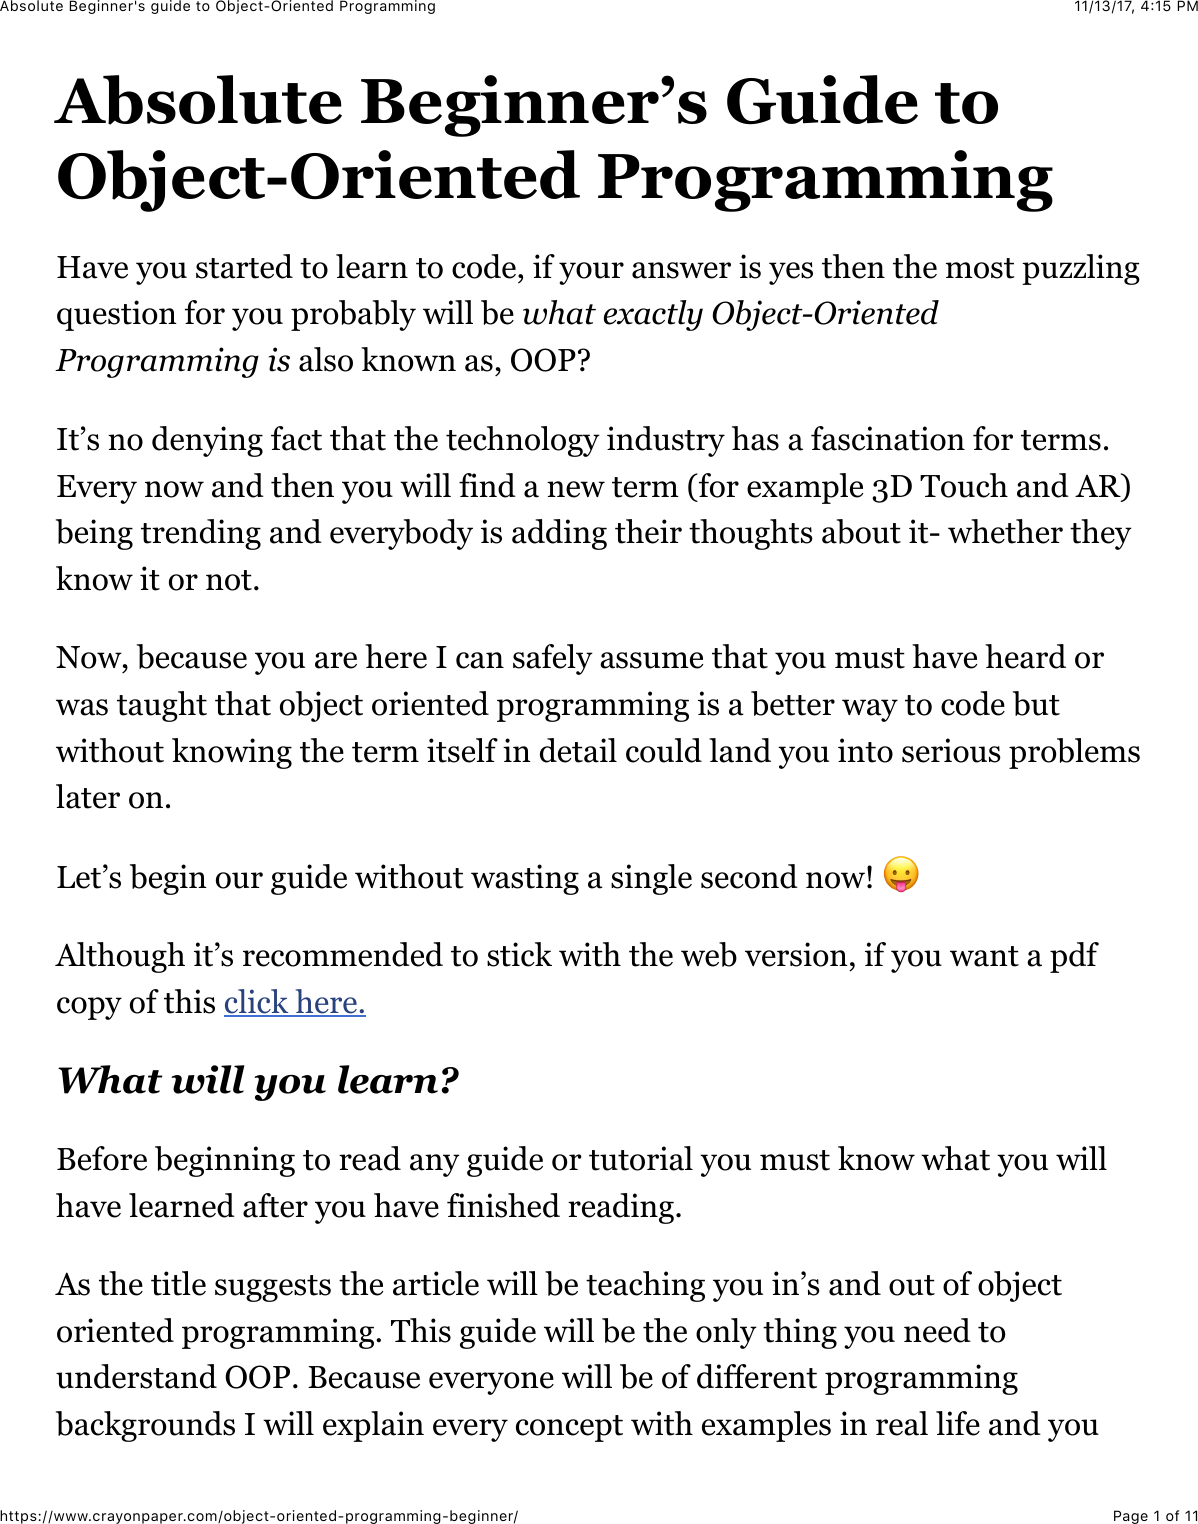 Page 1 of 11 - Absolute Beginner's Guide To Object-Oriented Programming